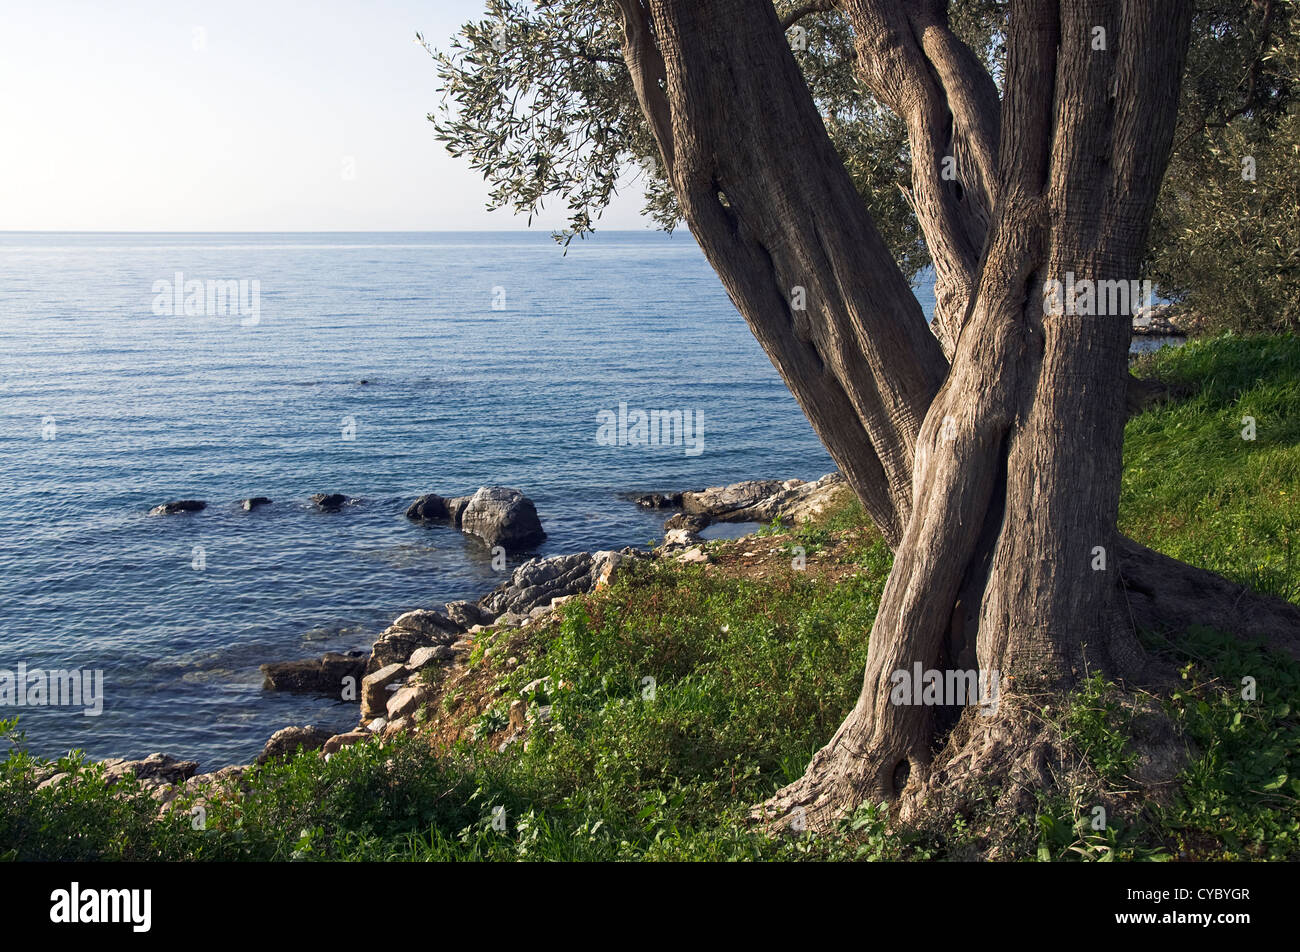 Olive tree by the sea Stock Photo